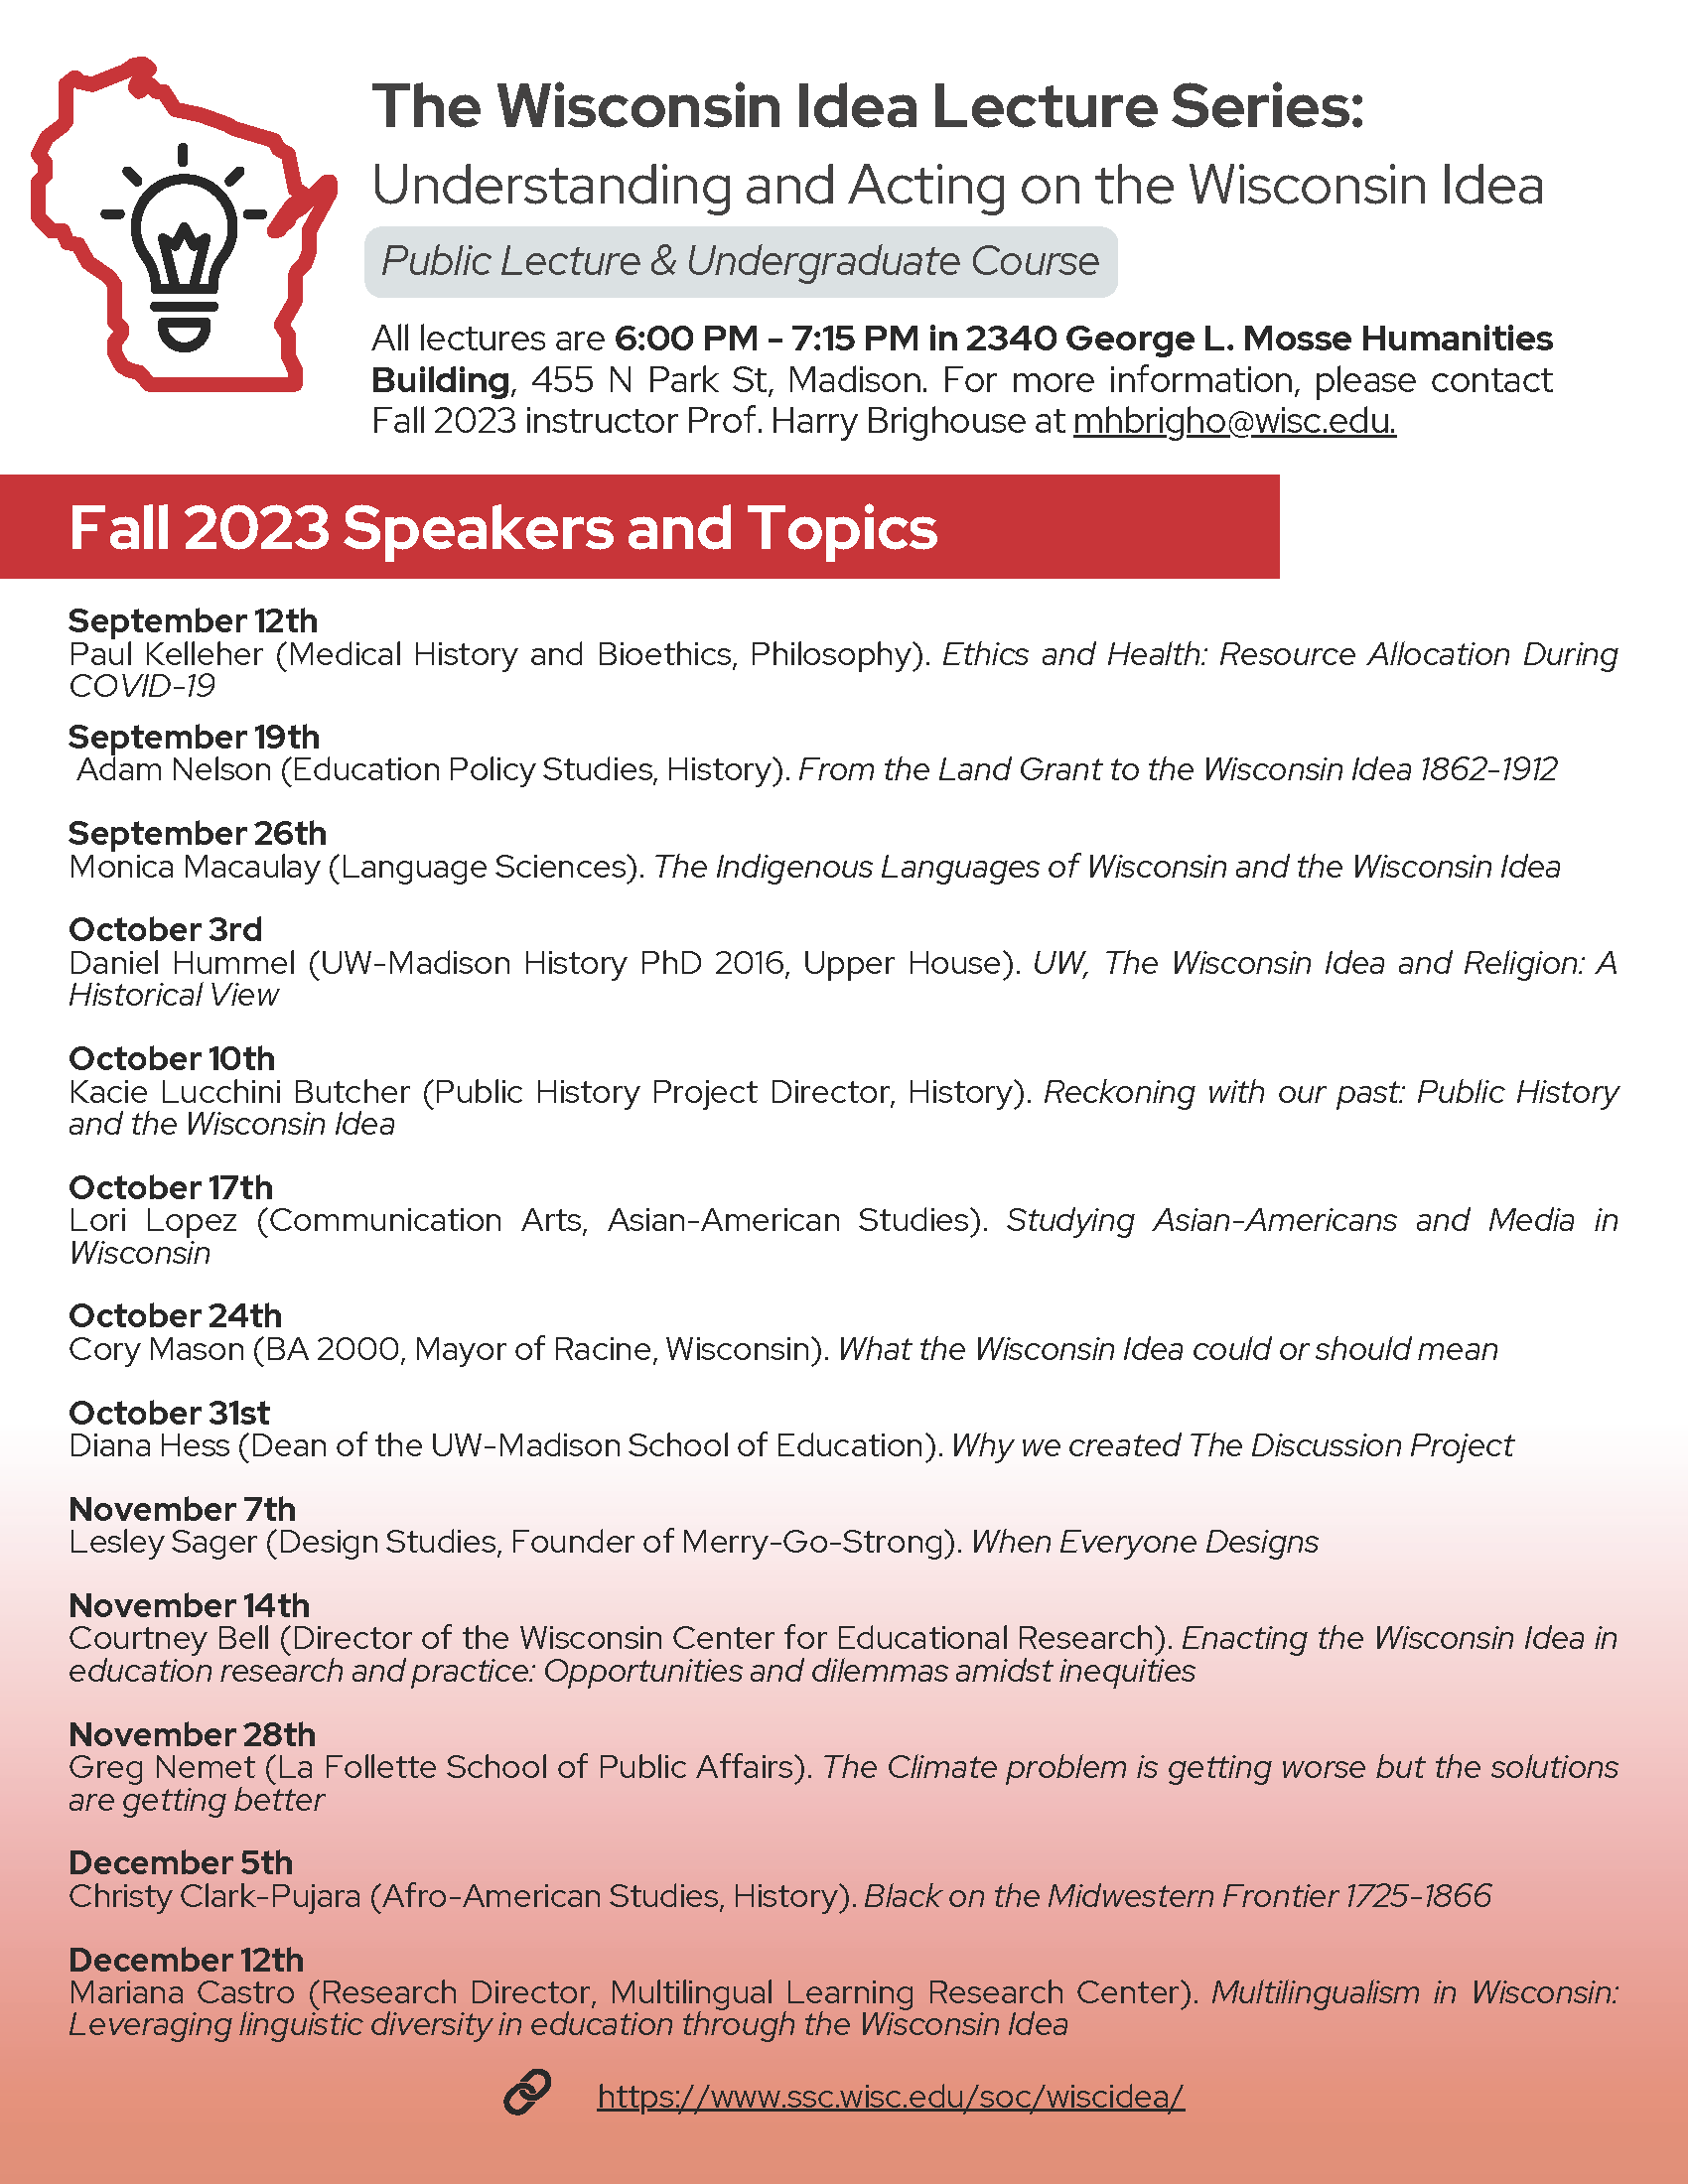 Wisconsin Idea Lecture Series Fall 2023 Schedule